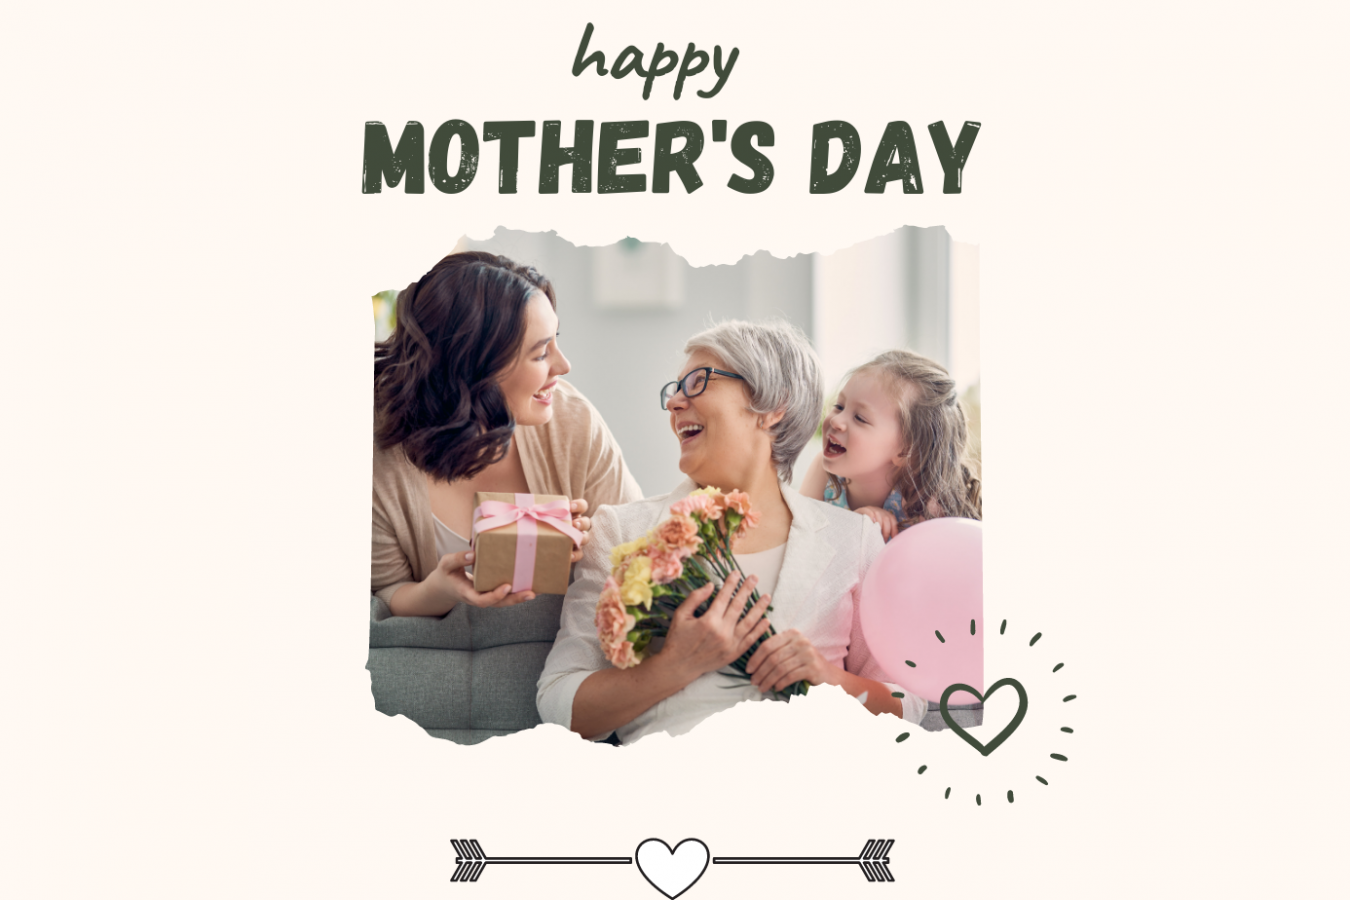 Mother's Day Marketing Ideas For Your Salon